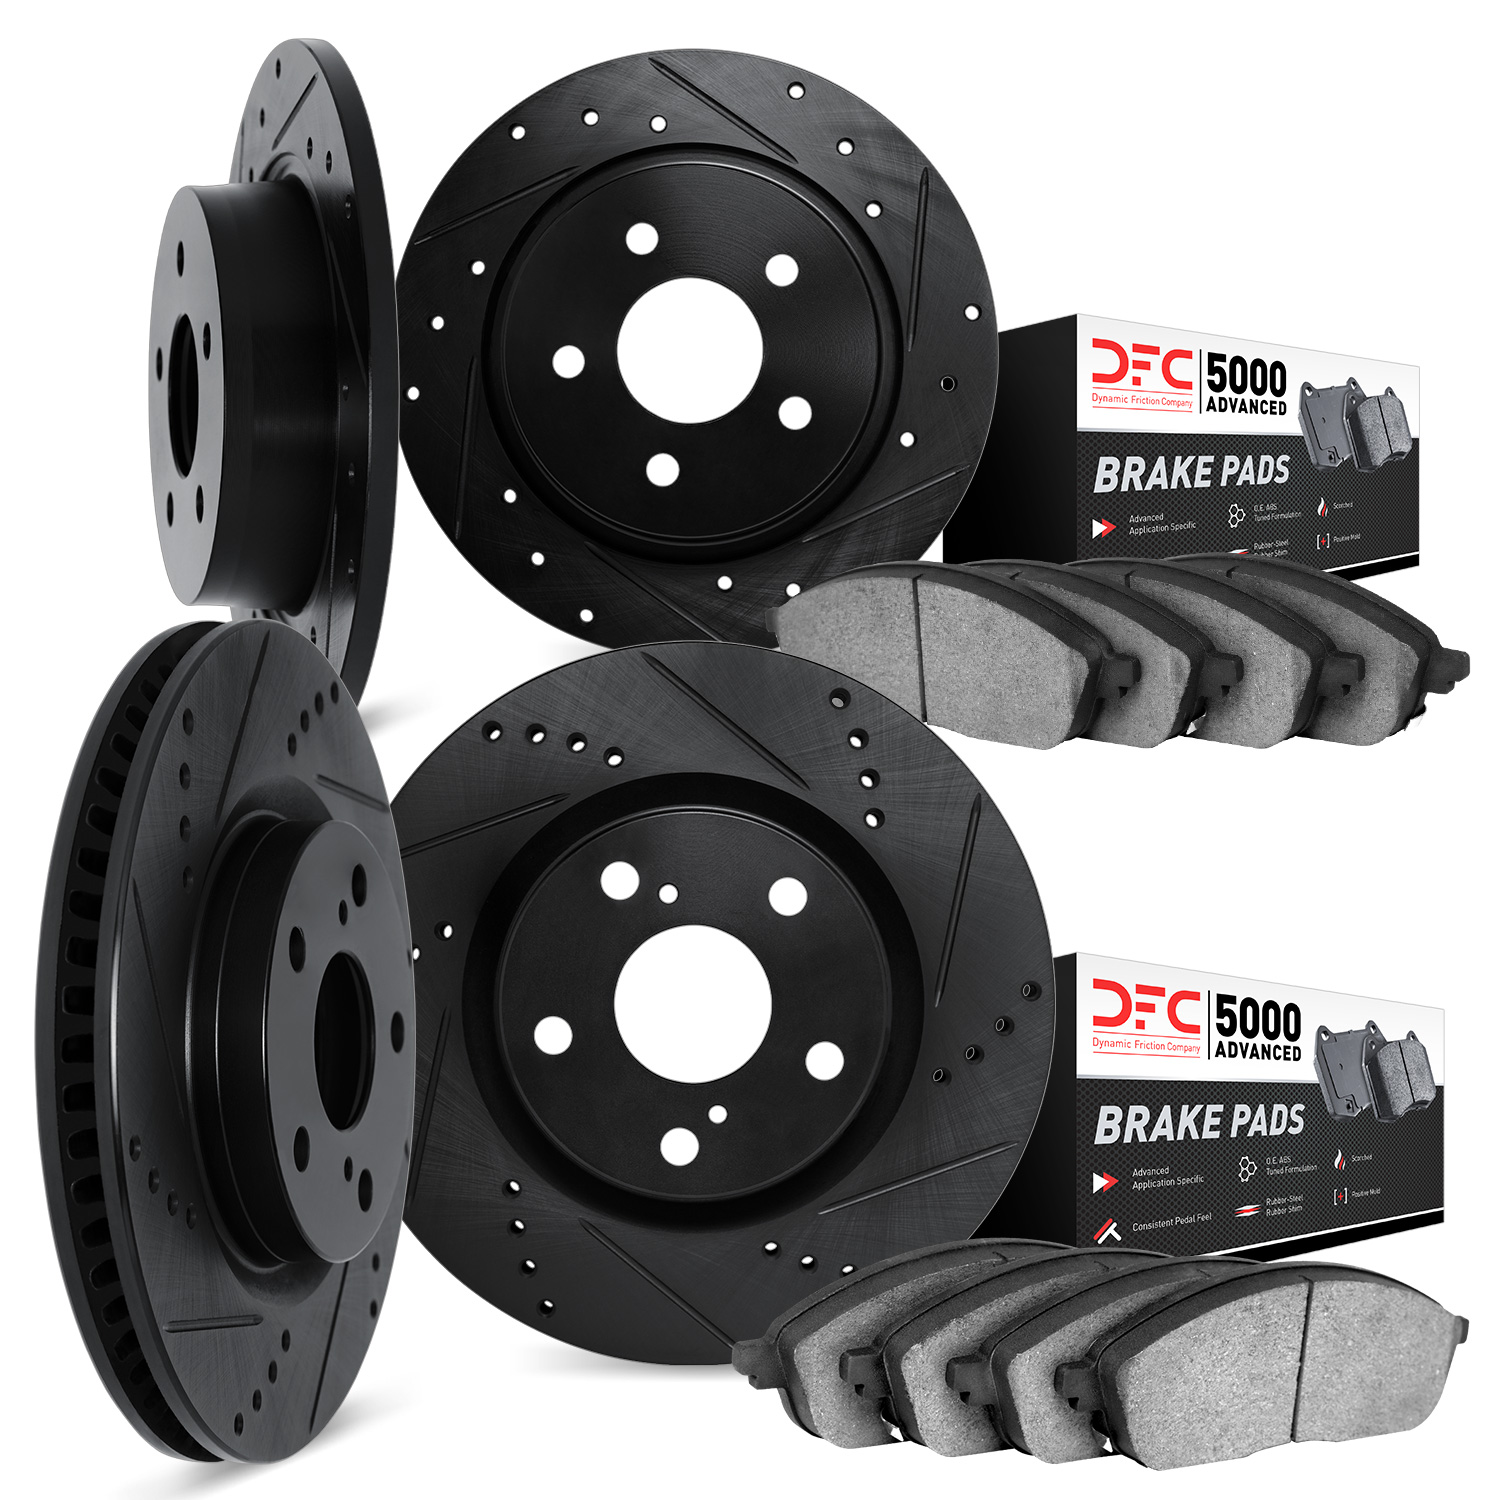 8504-72044 Drilled/Slotted Brake Rotors w/5000 Advanced Brake Pads Kit [Black], 2005-2006 Mitsubishi, Position: Front and Rear